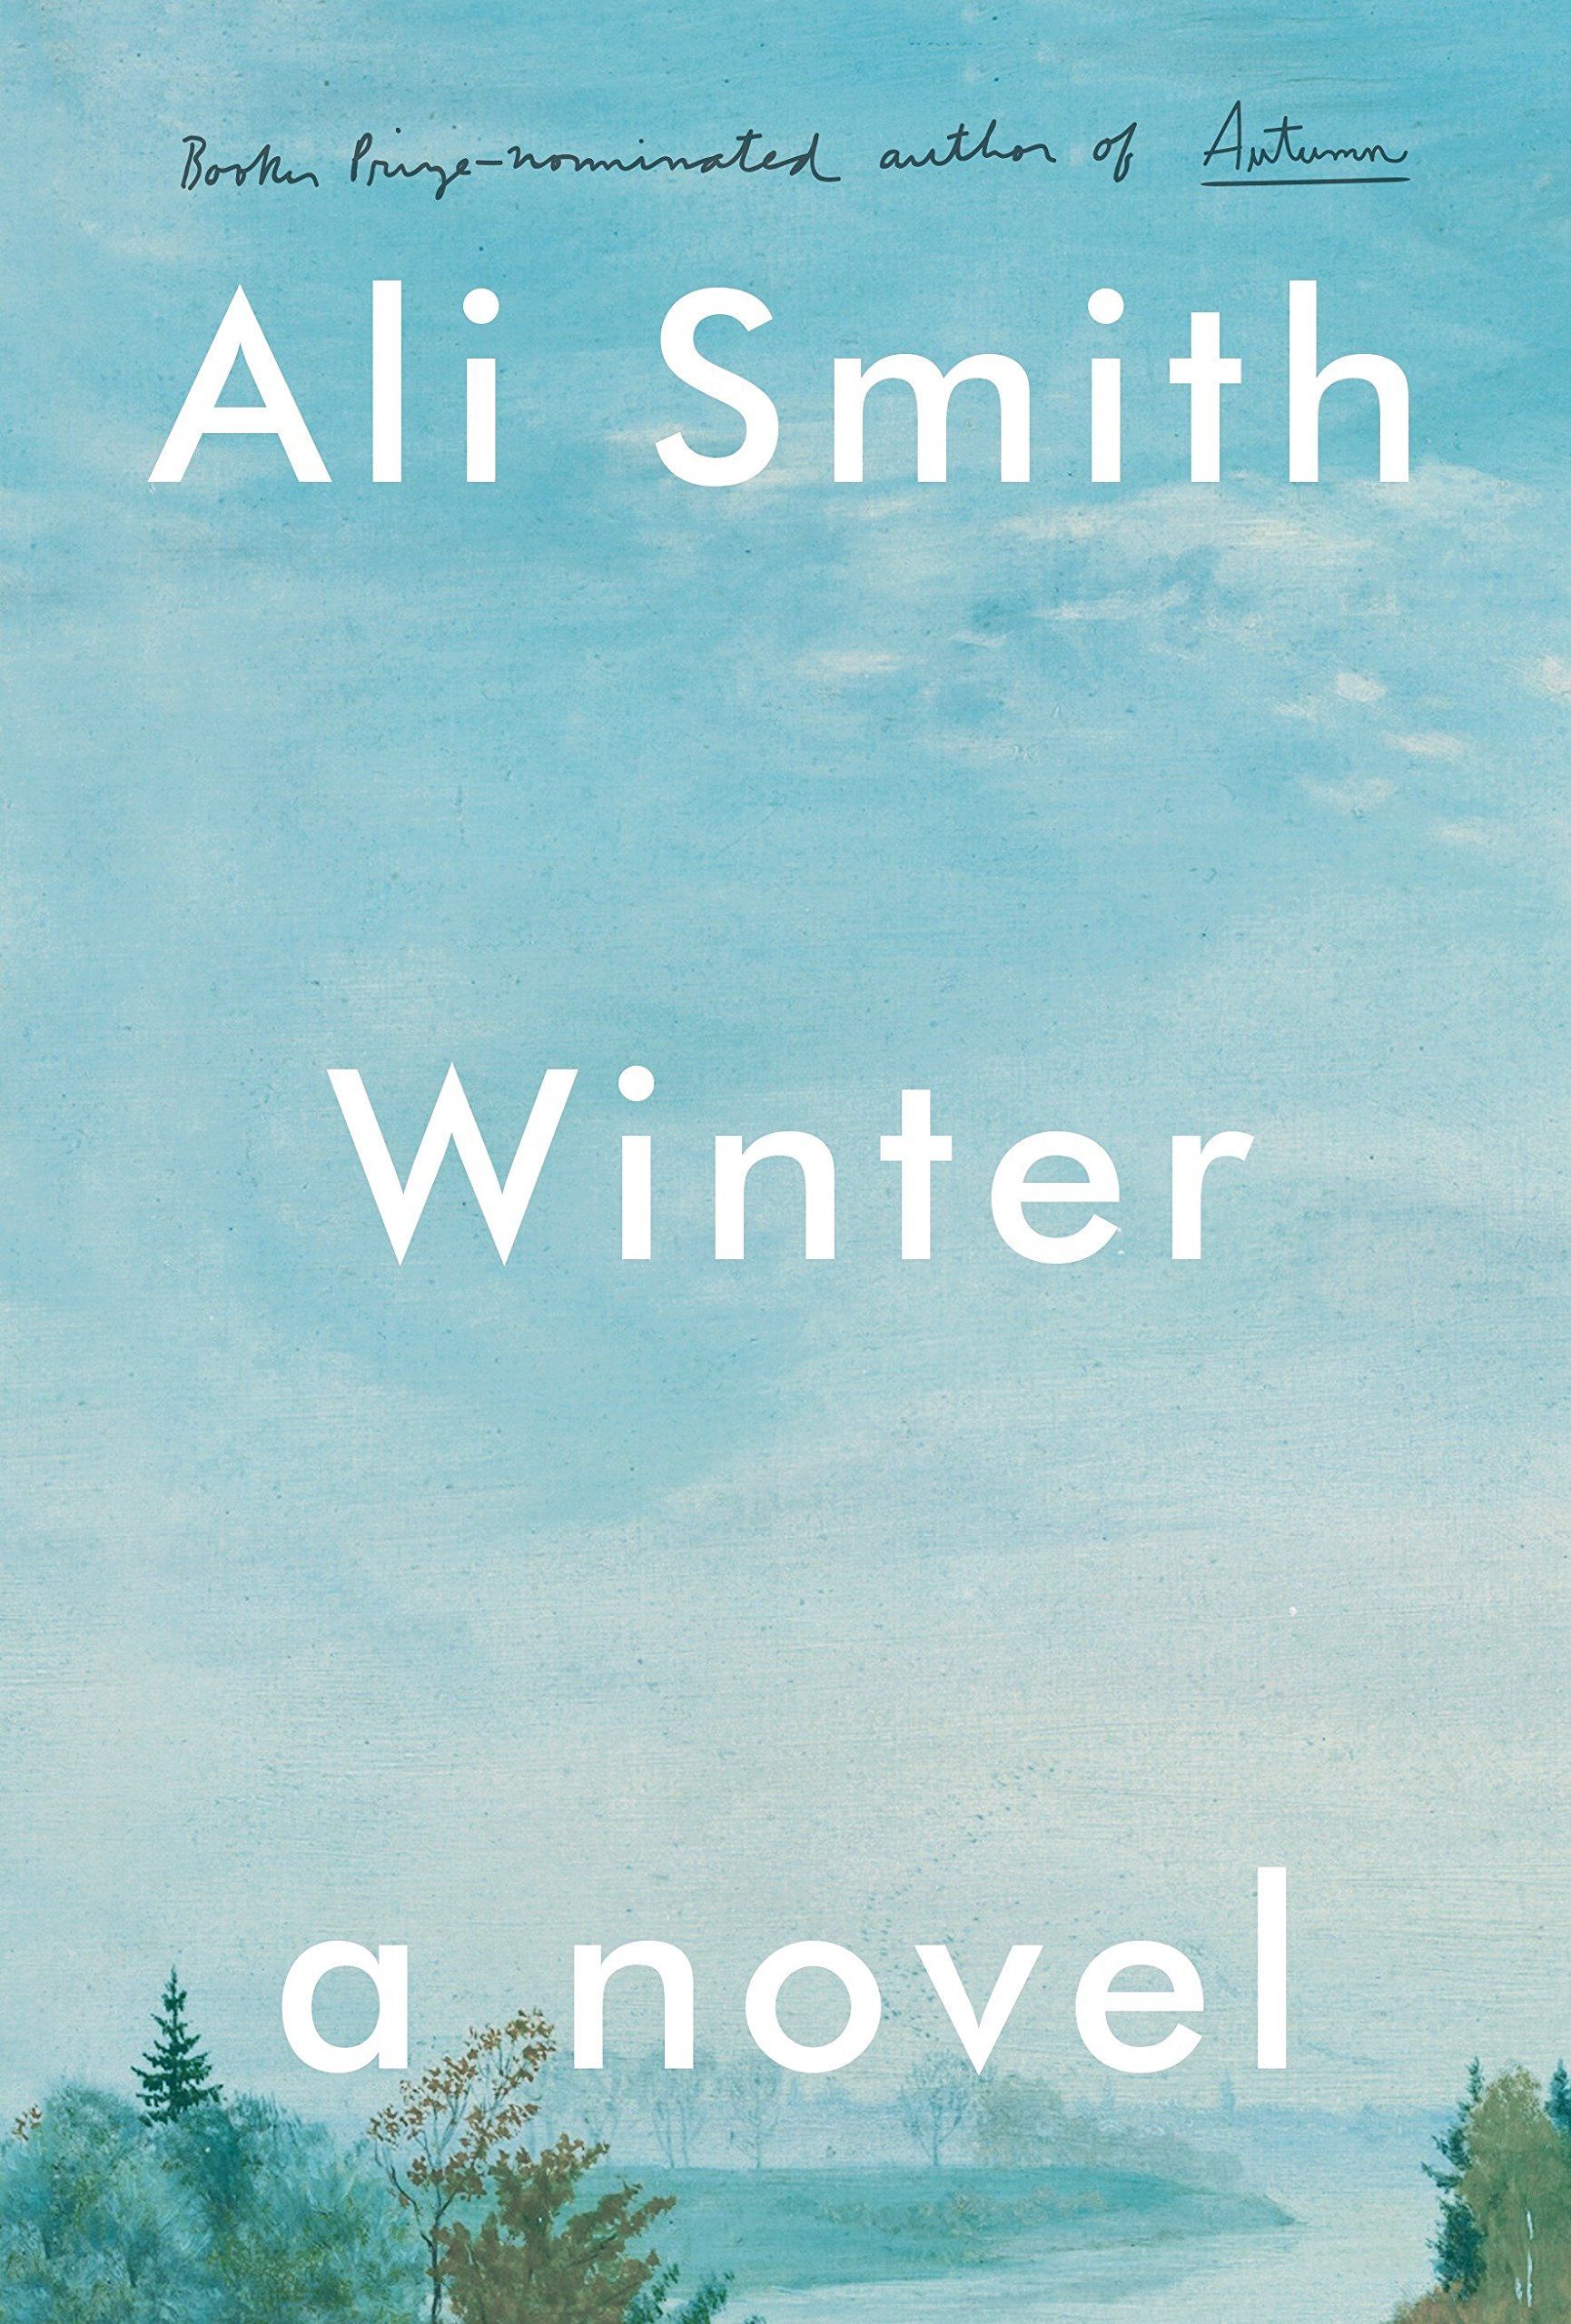 Antidotes to Brexit, COVID-19, and Other Afflictions in Ali Smith’s Seasonal Quartet